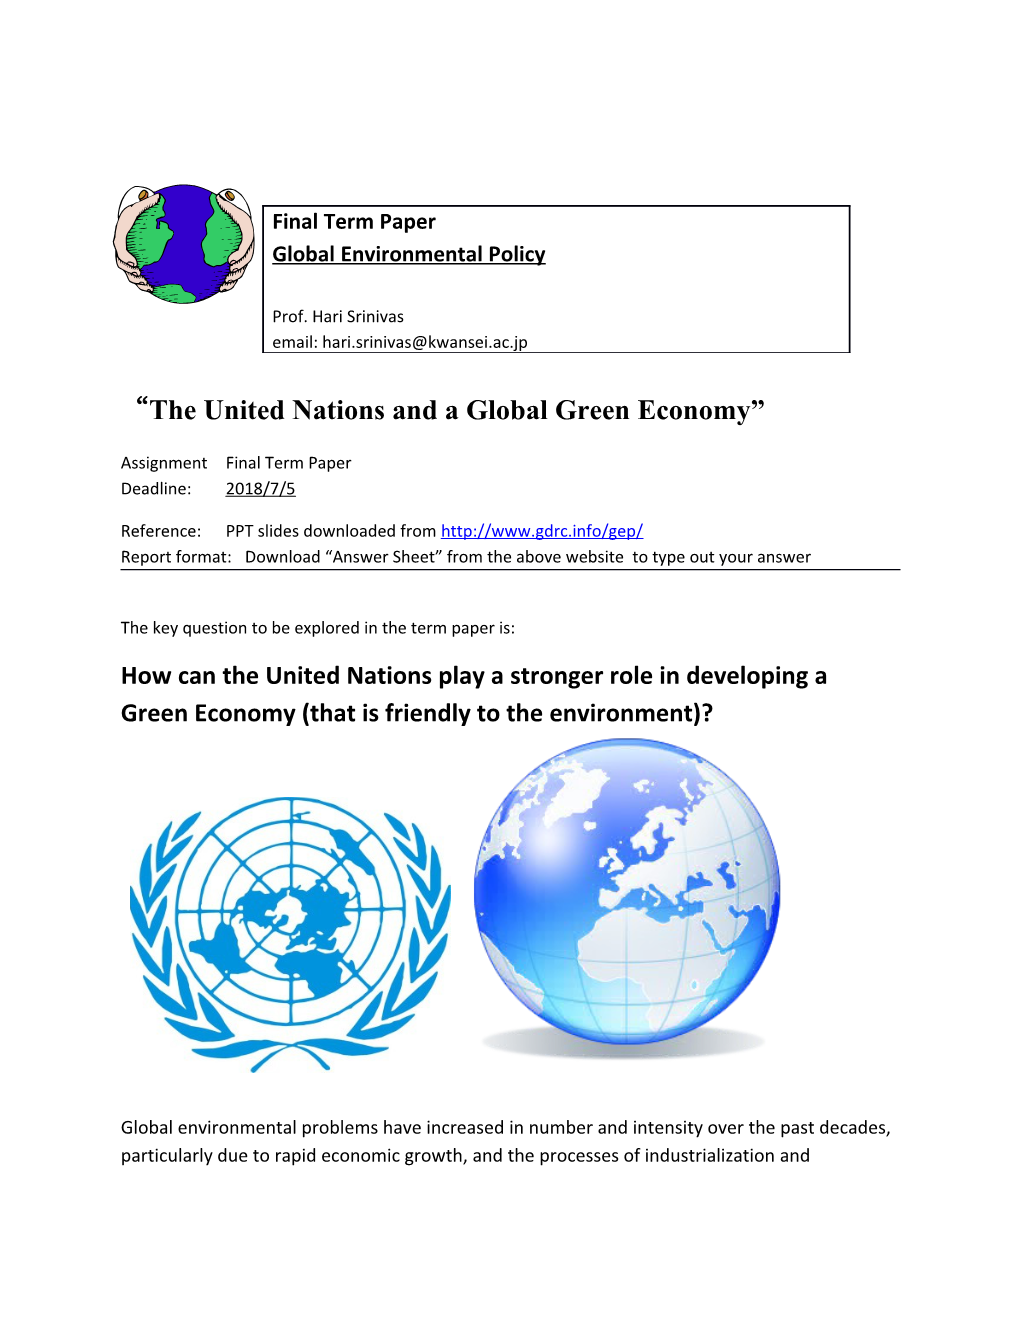 The United Nations and a Global Green Economy